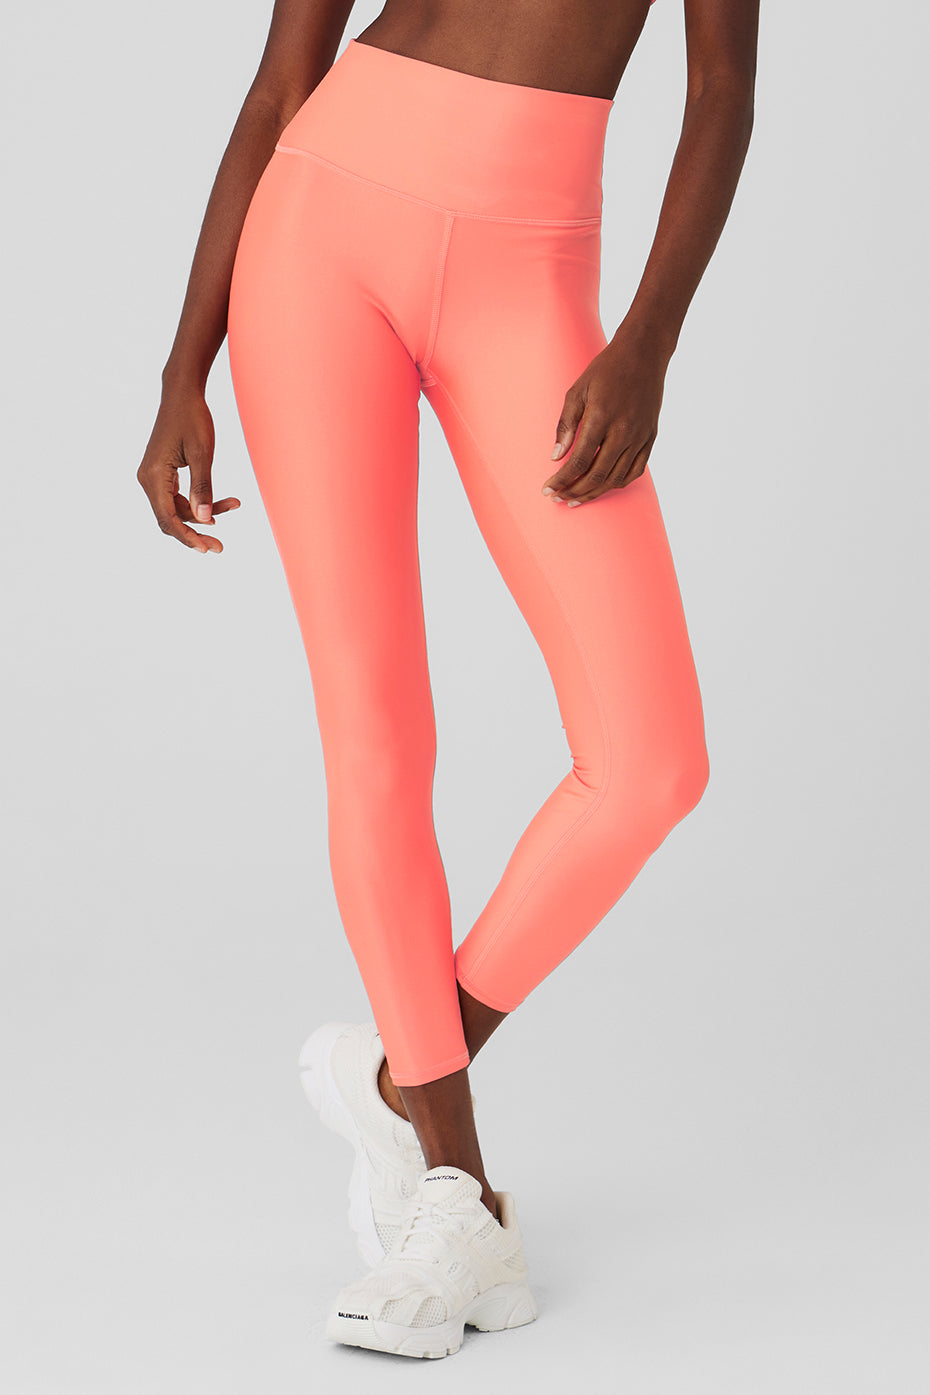 Unique Leggings: Alo 7/8 High-Waist Moto Legging, 45 Essential Workout  Pieces You Can Score on Sale This Presidents' Day